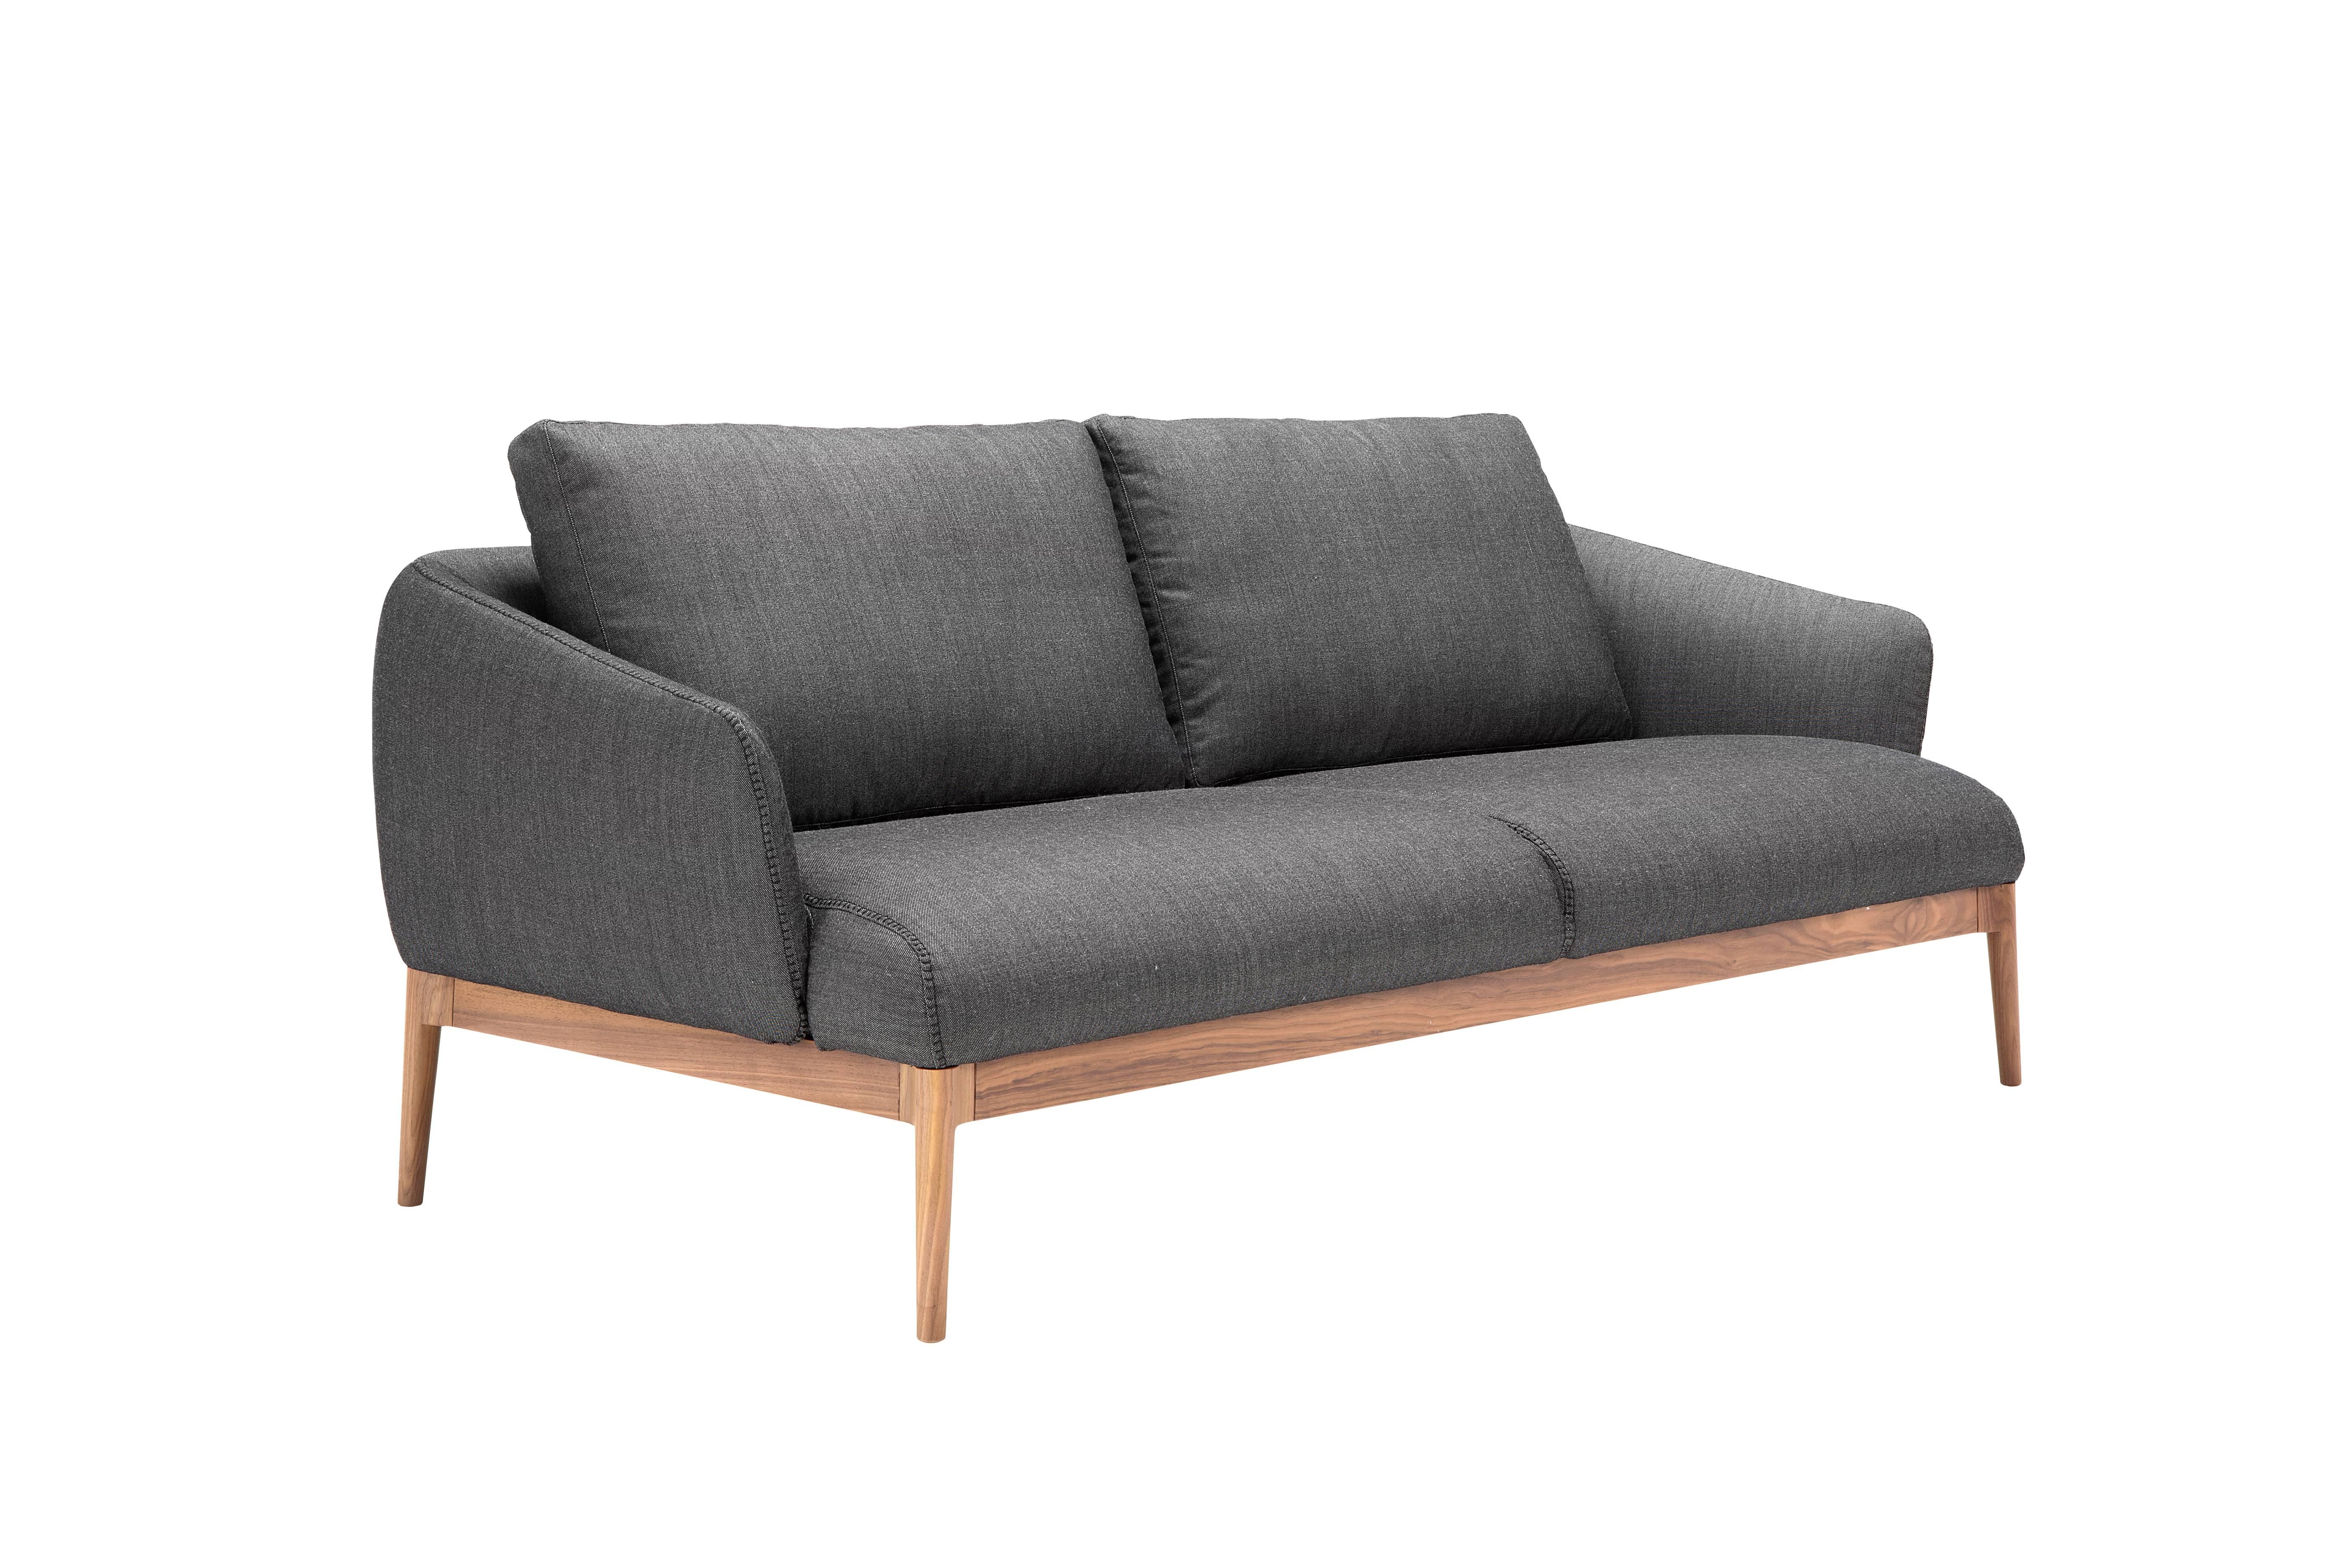 Modern Theo Sofa in Charcoal Gray by Maurizio Marconato & Terry Zappa For Sale